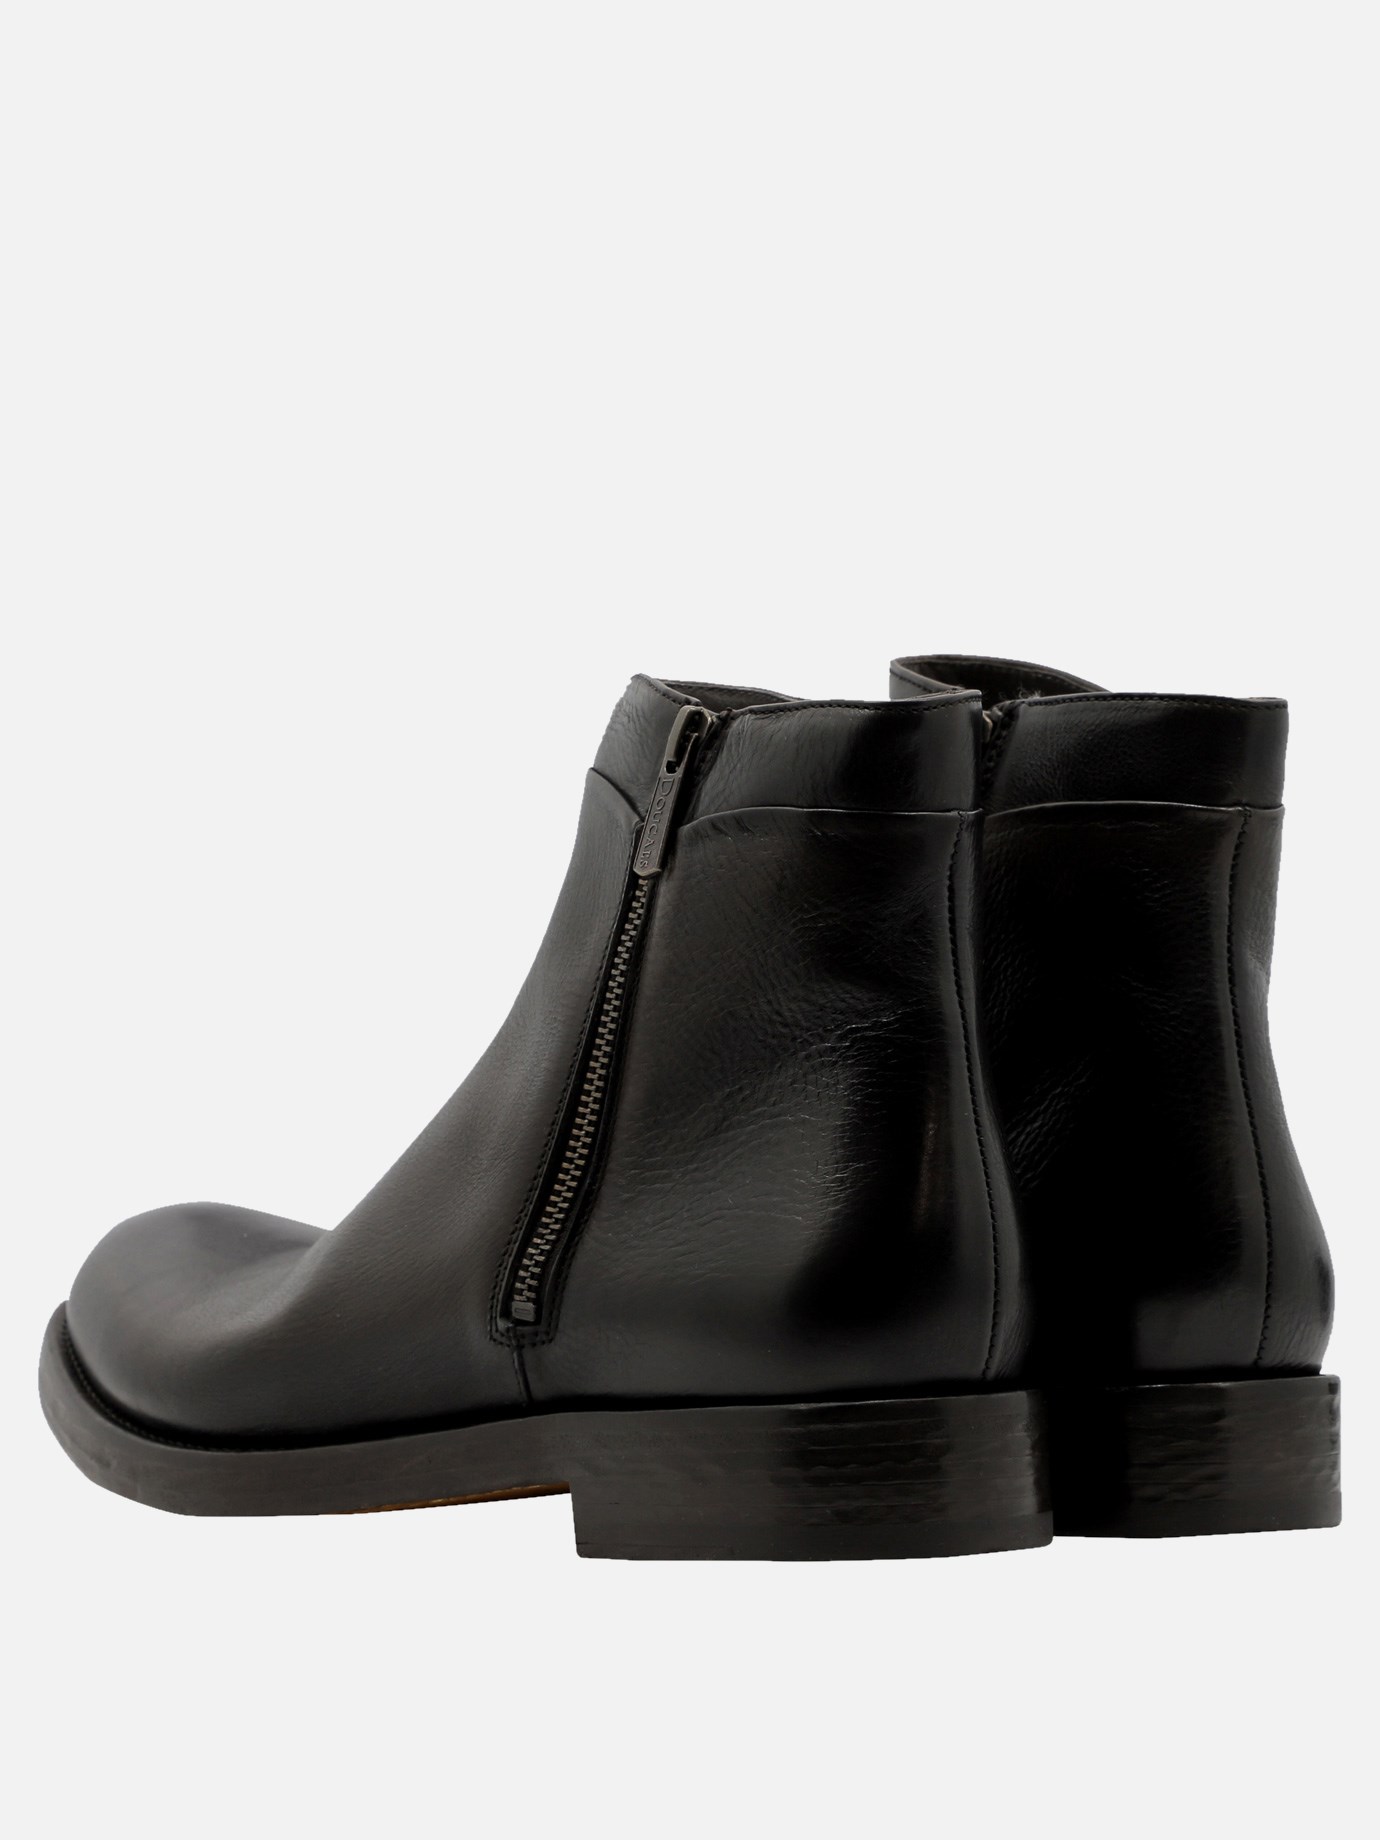 Ankle boots with side zip by Doucal's